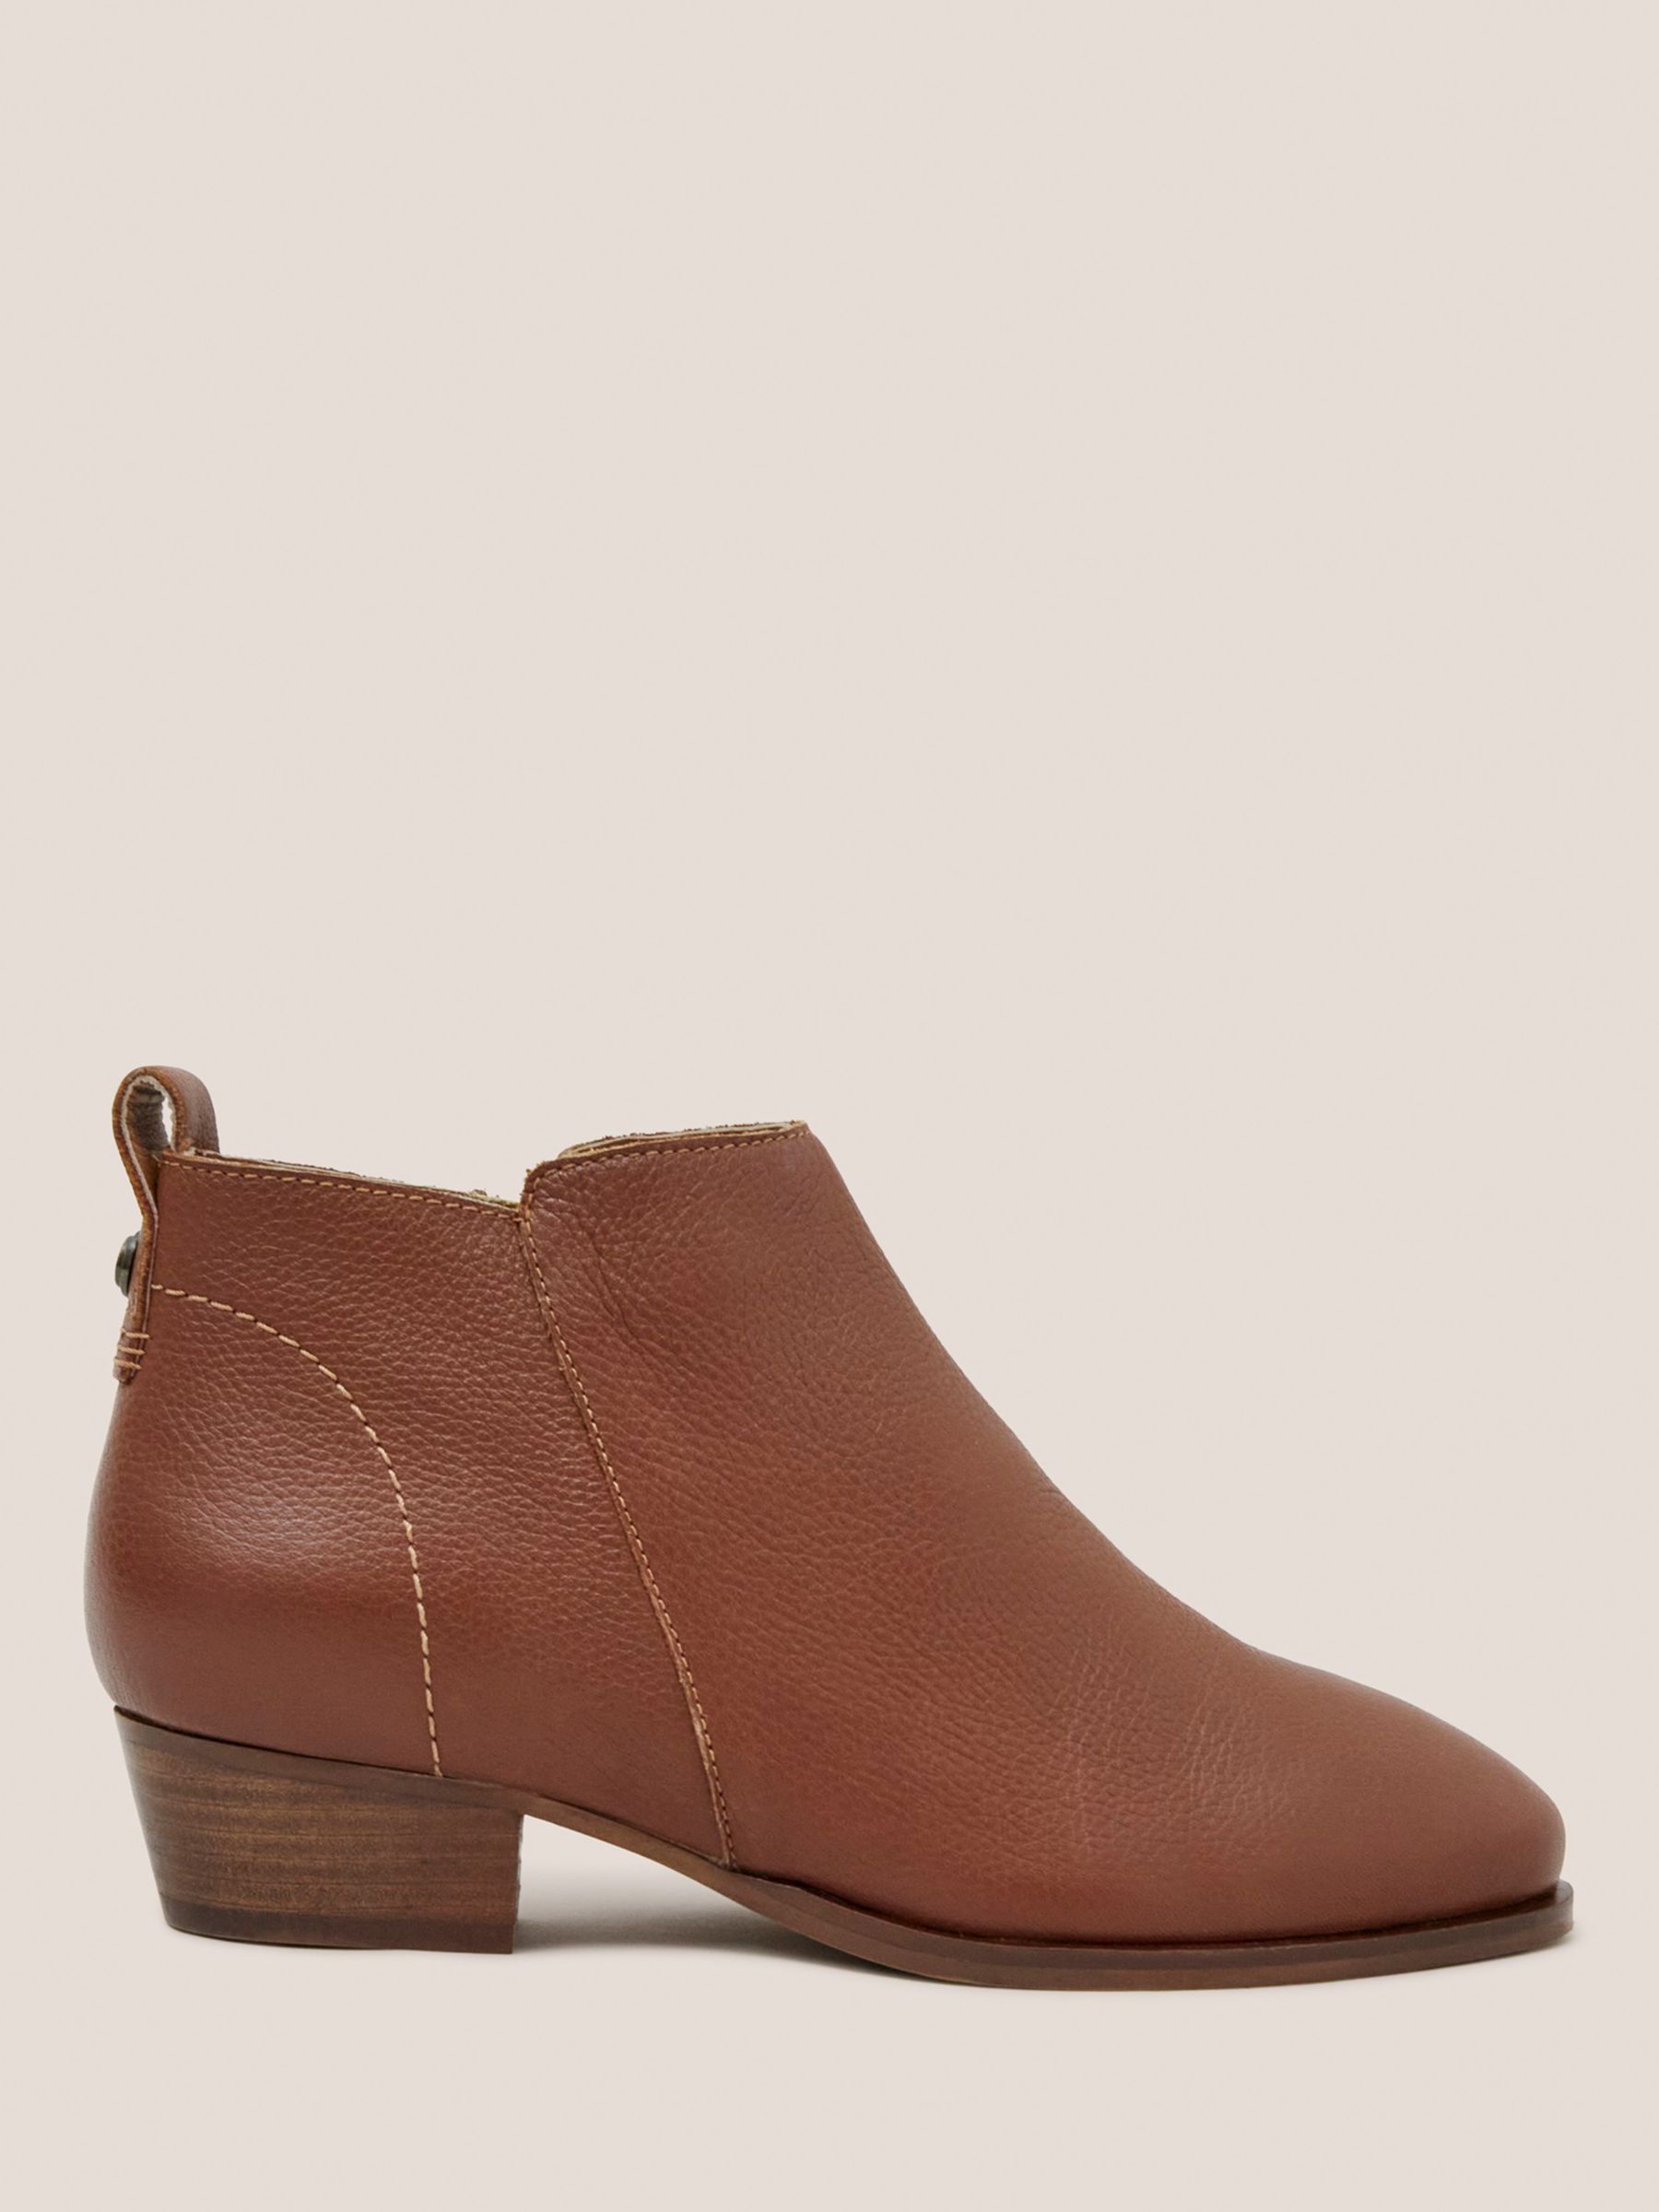 White Stuff Leather Ankle Boots, Dark Tan, 8